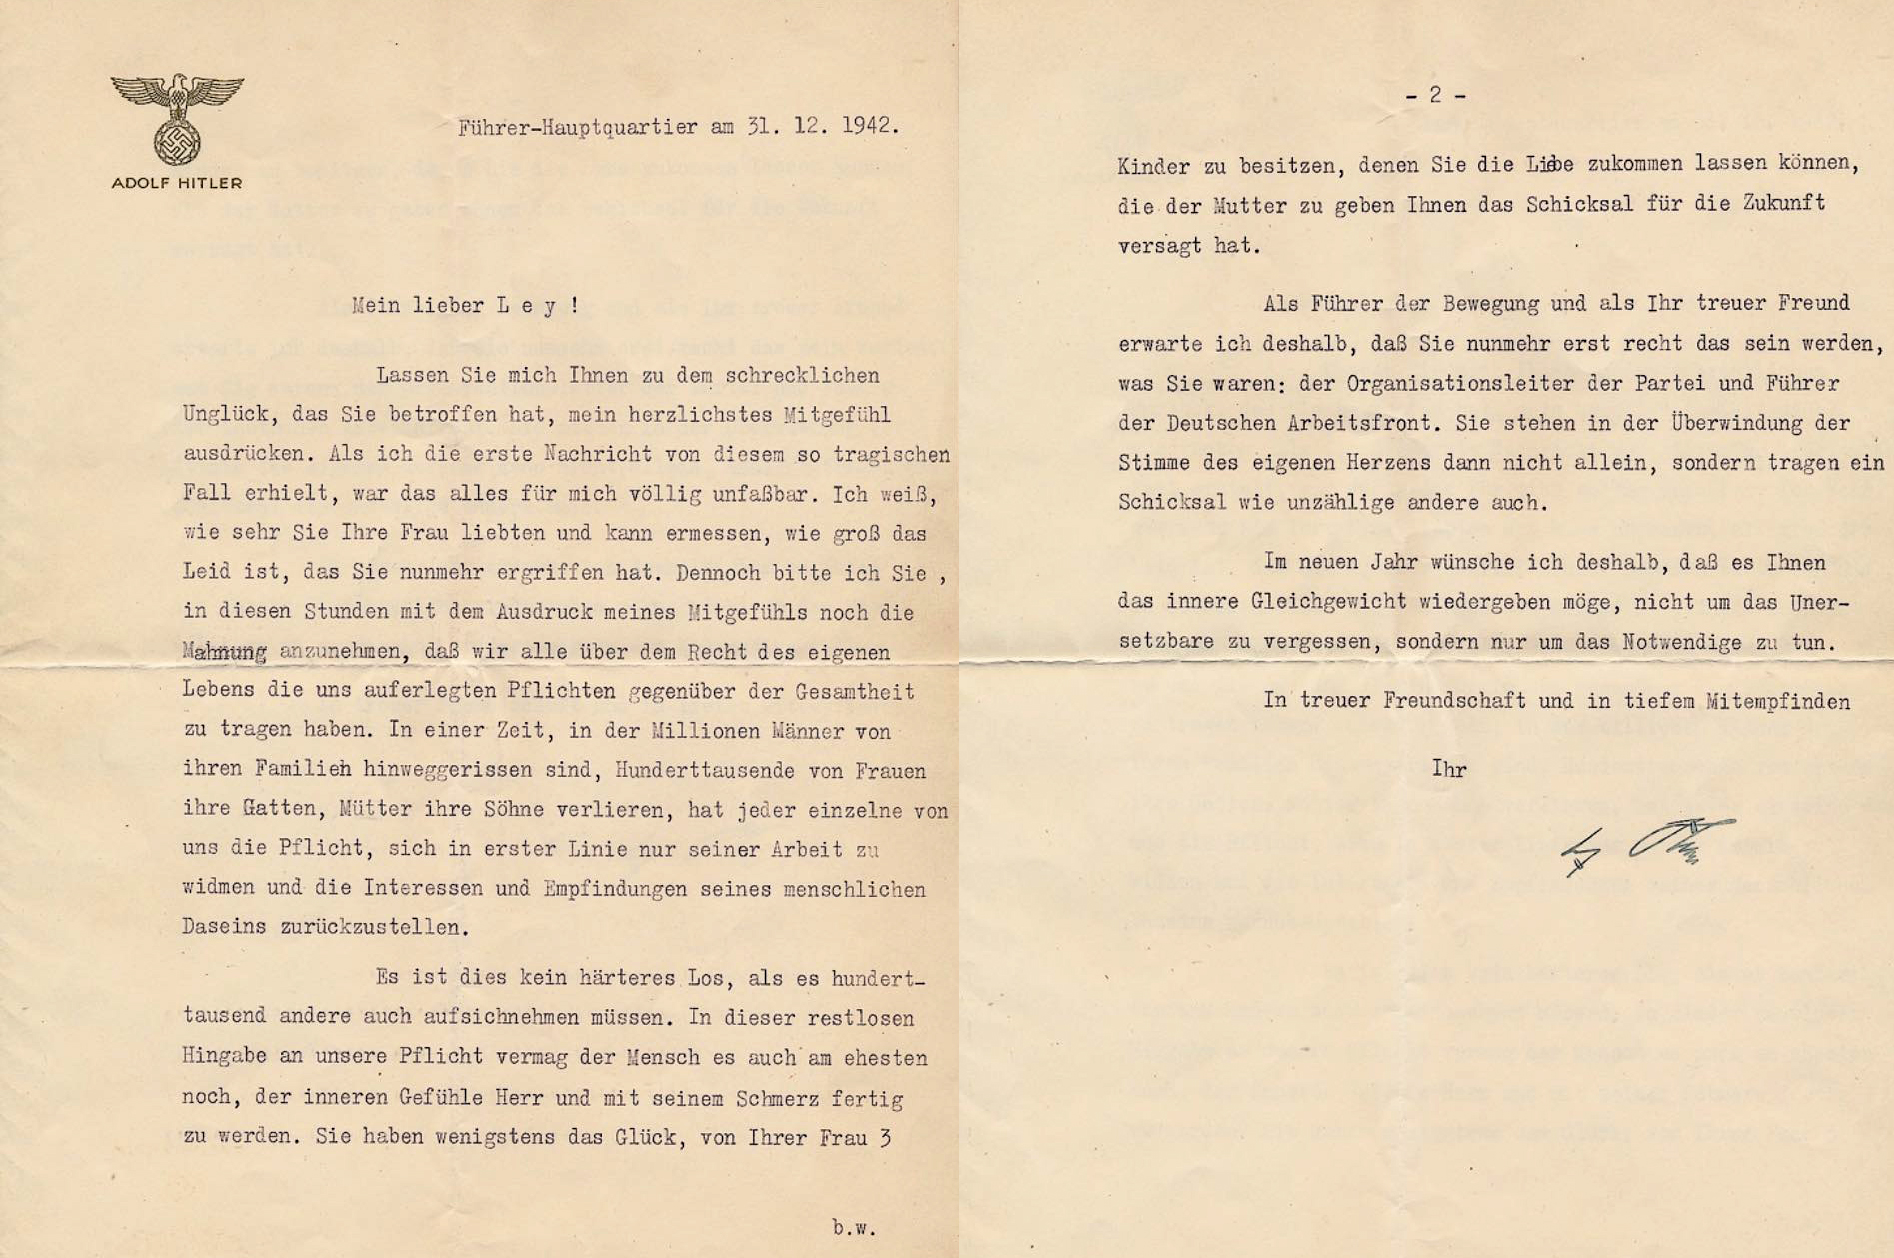 Adolf Hitler sends a condolences letter to Robert Ley after the suicide of his wife Inge